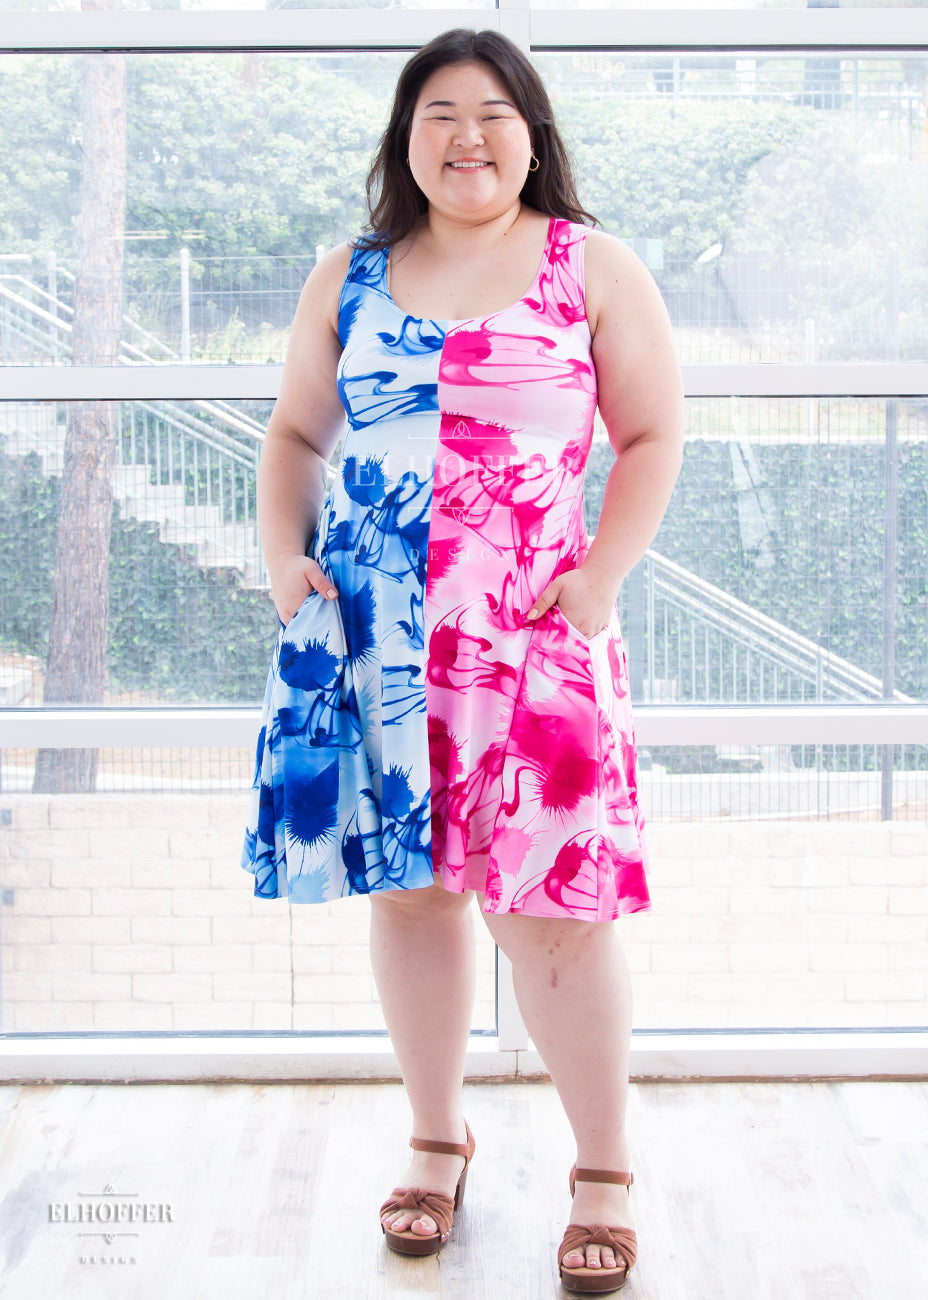 Ashley (a fair skinned size large / extra large model with long dark hair) wears the scoop neck sleeveless spandex knee length dress. The right half of the dress is a blue alcohol ink swirl pattern and the left half of the dress is a hot pink alcohol ink swirl pattern.